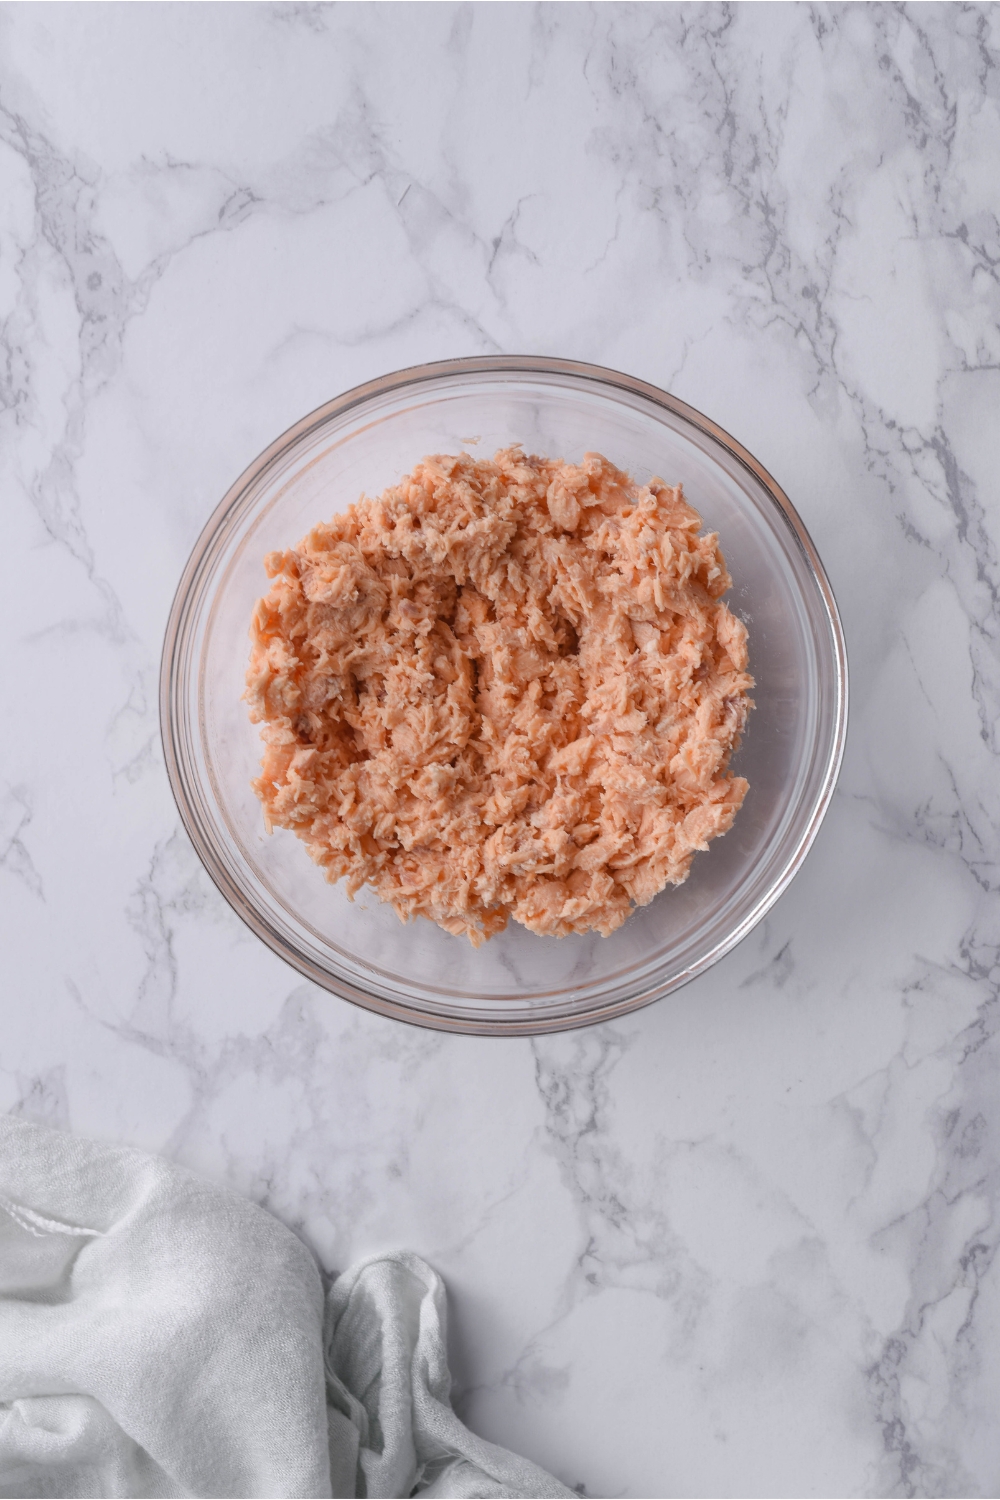 A clear bowl filled with minced canned salmon.